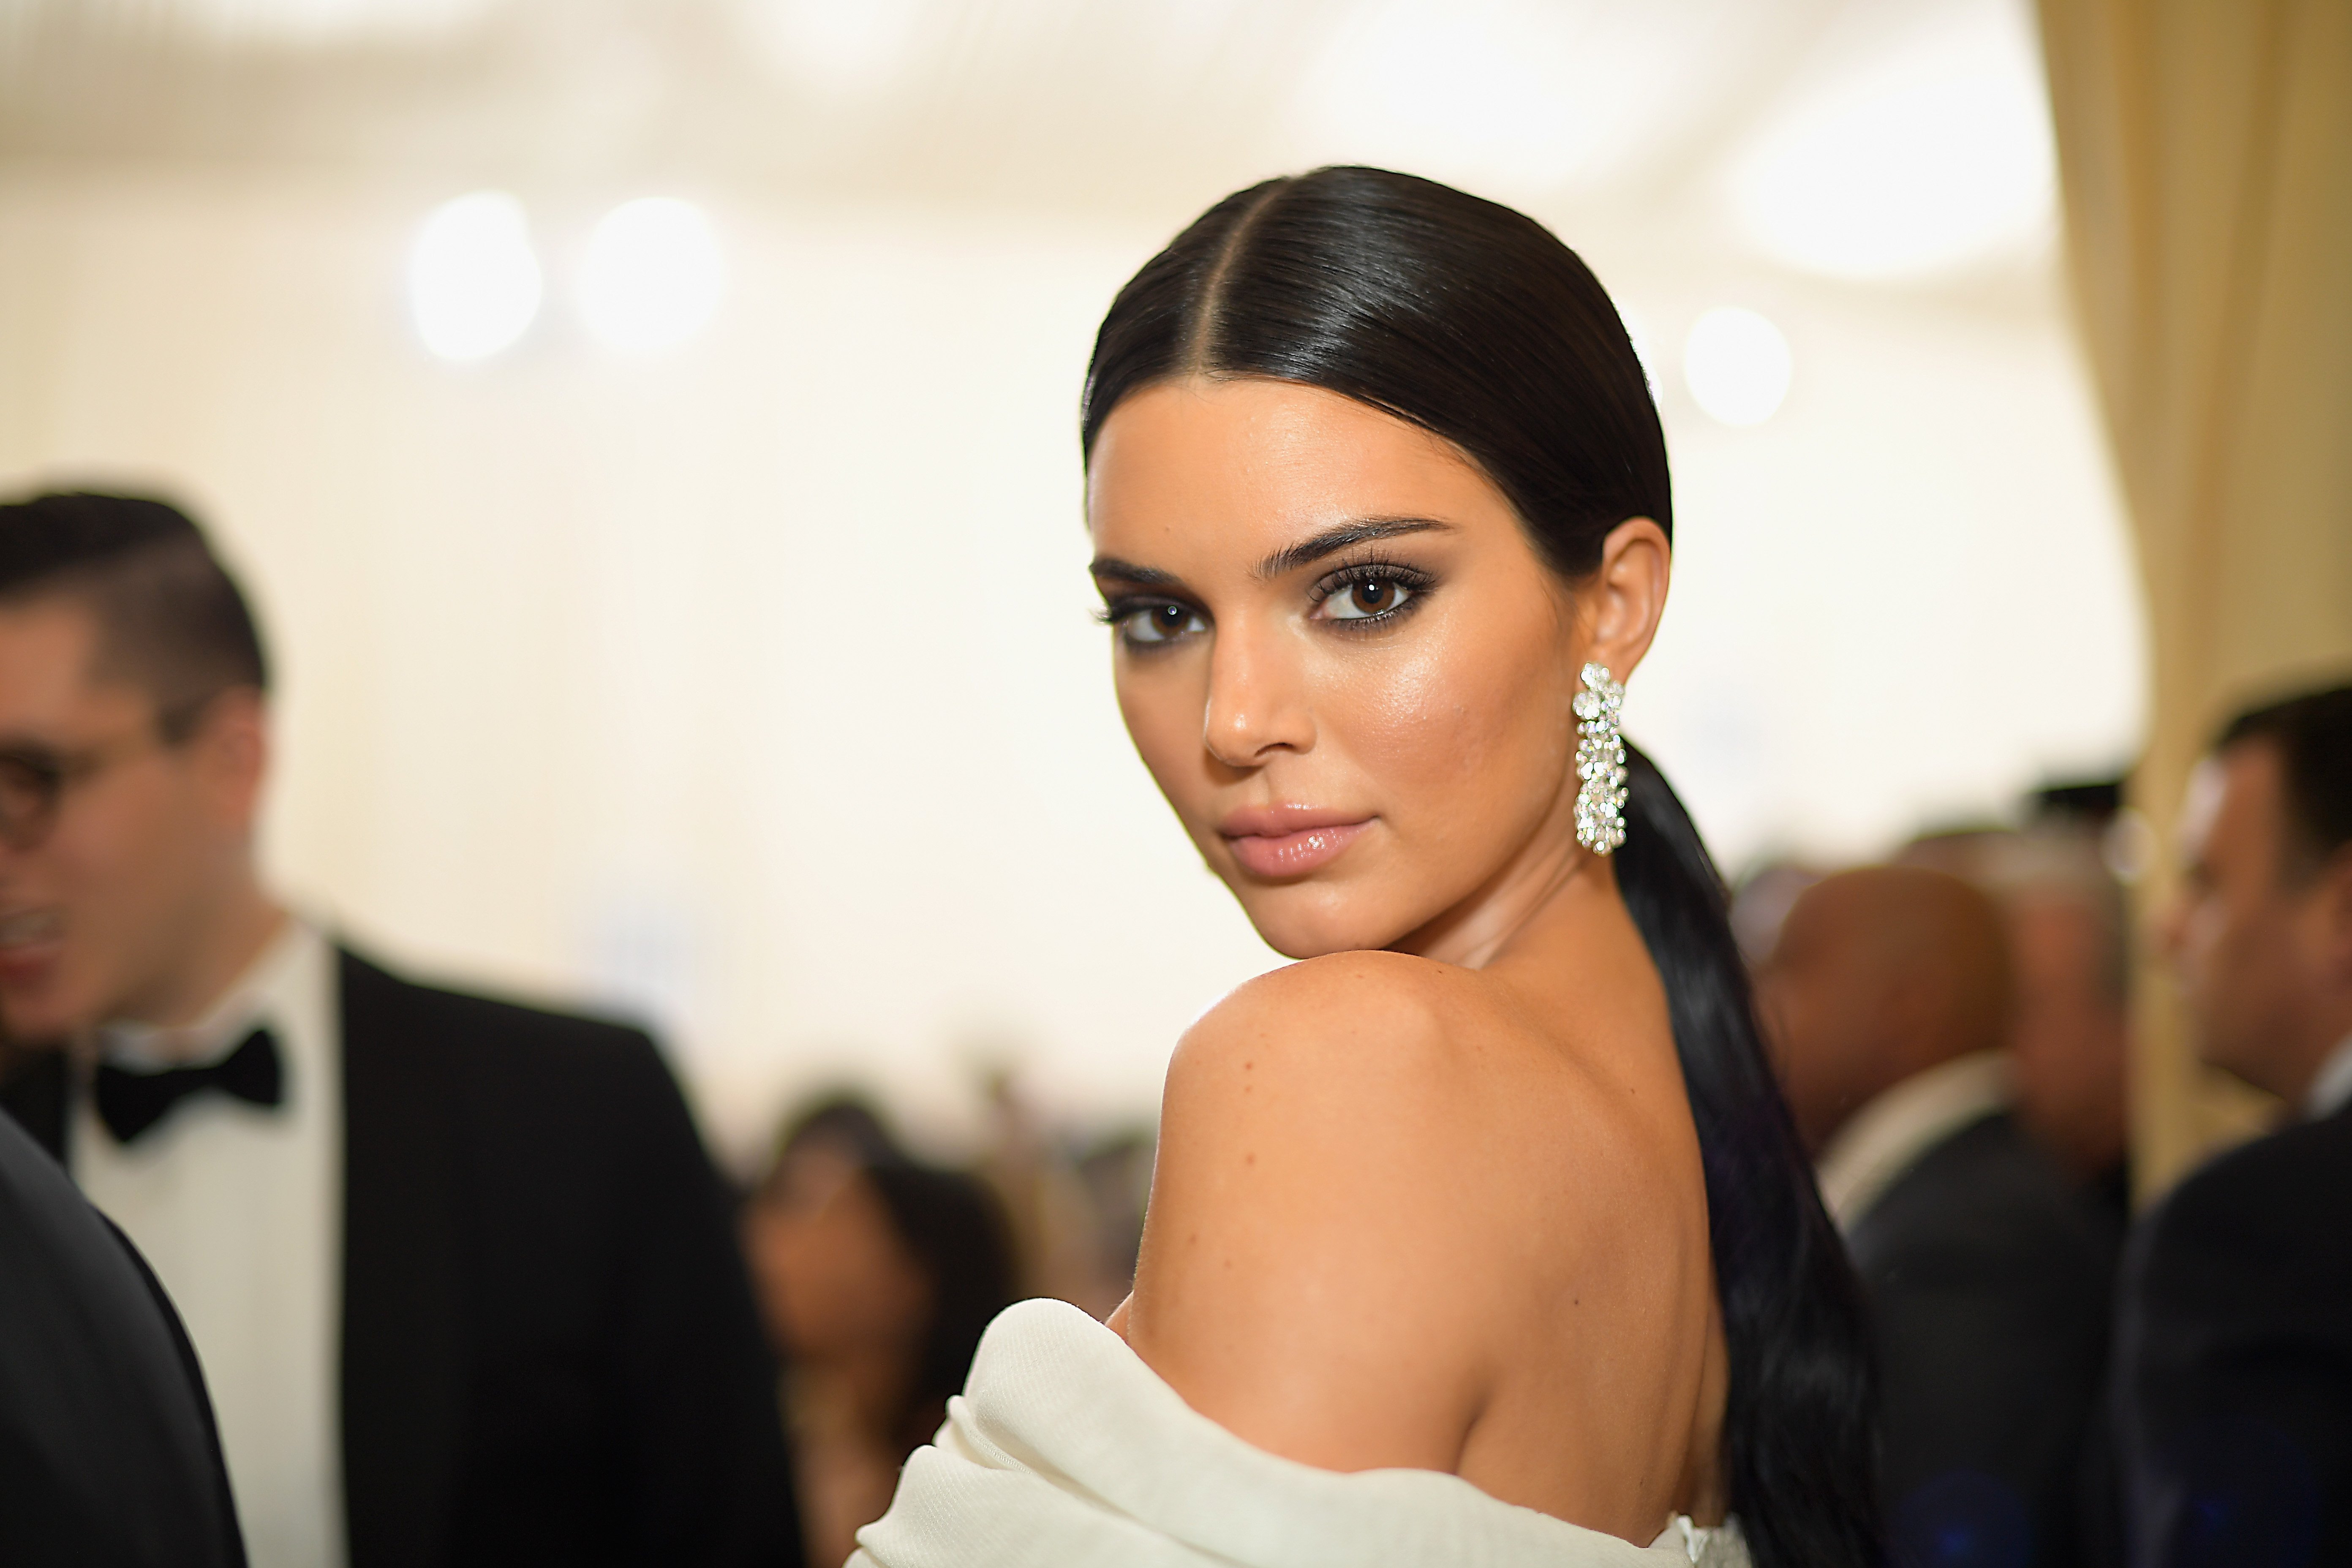 Kendall Jenner glaring at the camera while wearing a white gown.